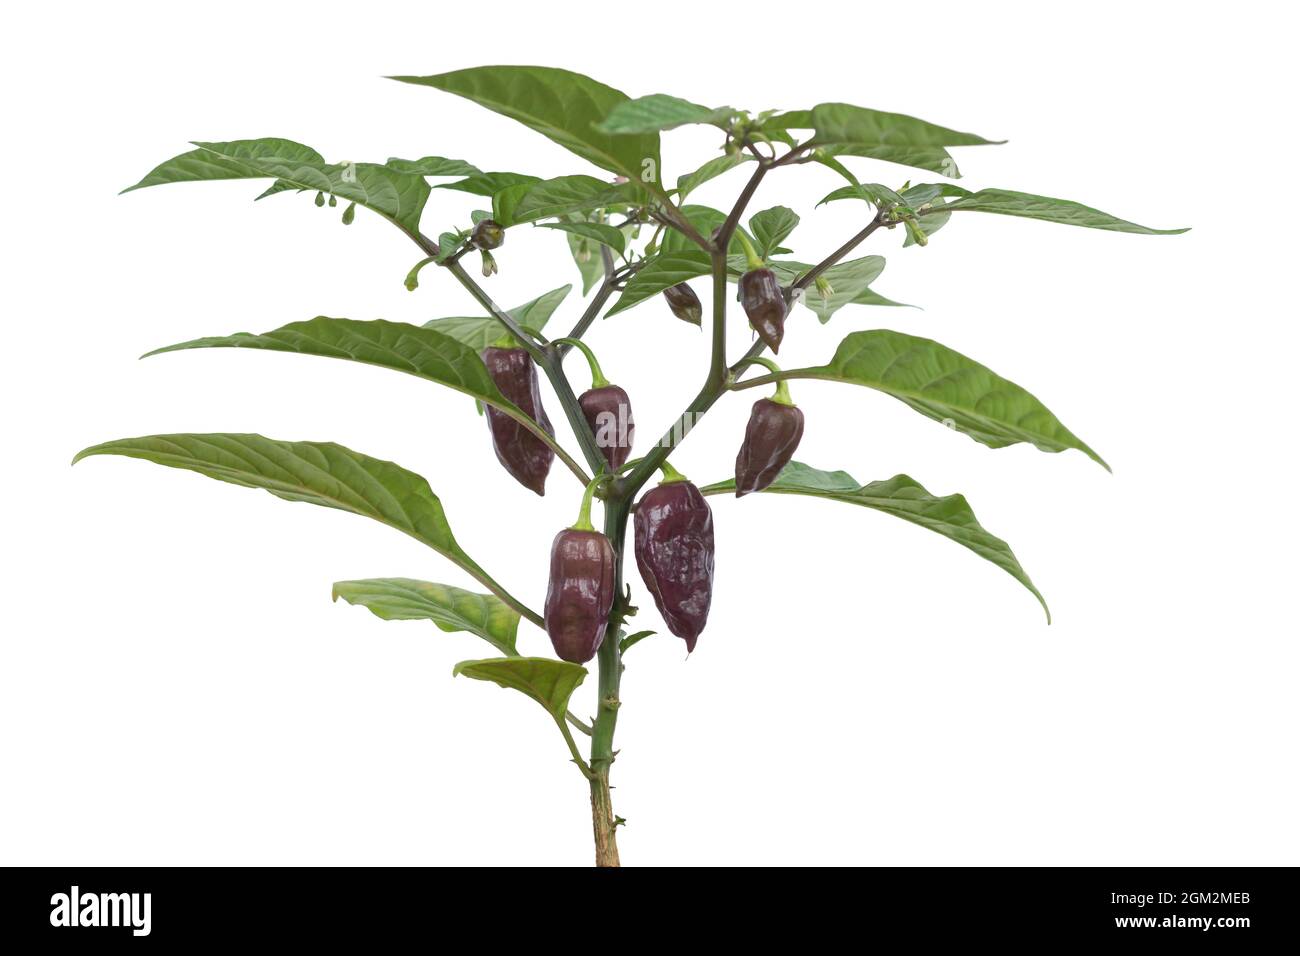 hottest capsicum chinense, habanero chilli peppers plant with purple chilli peppers, green chilli plant with leaves and flowers isolated in white Stock Photo